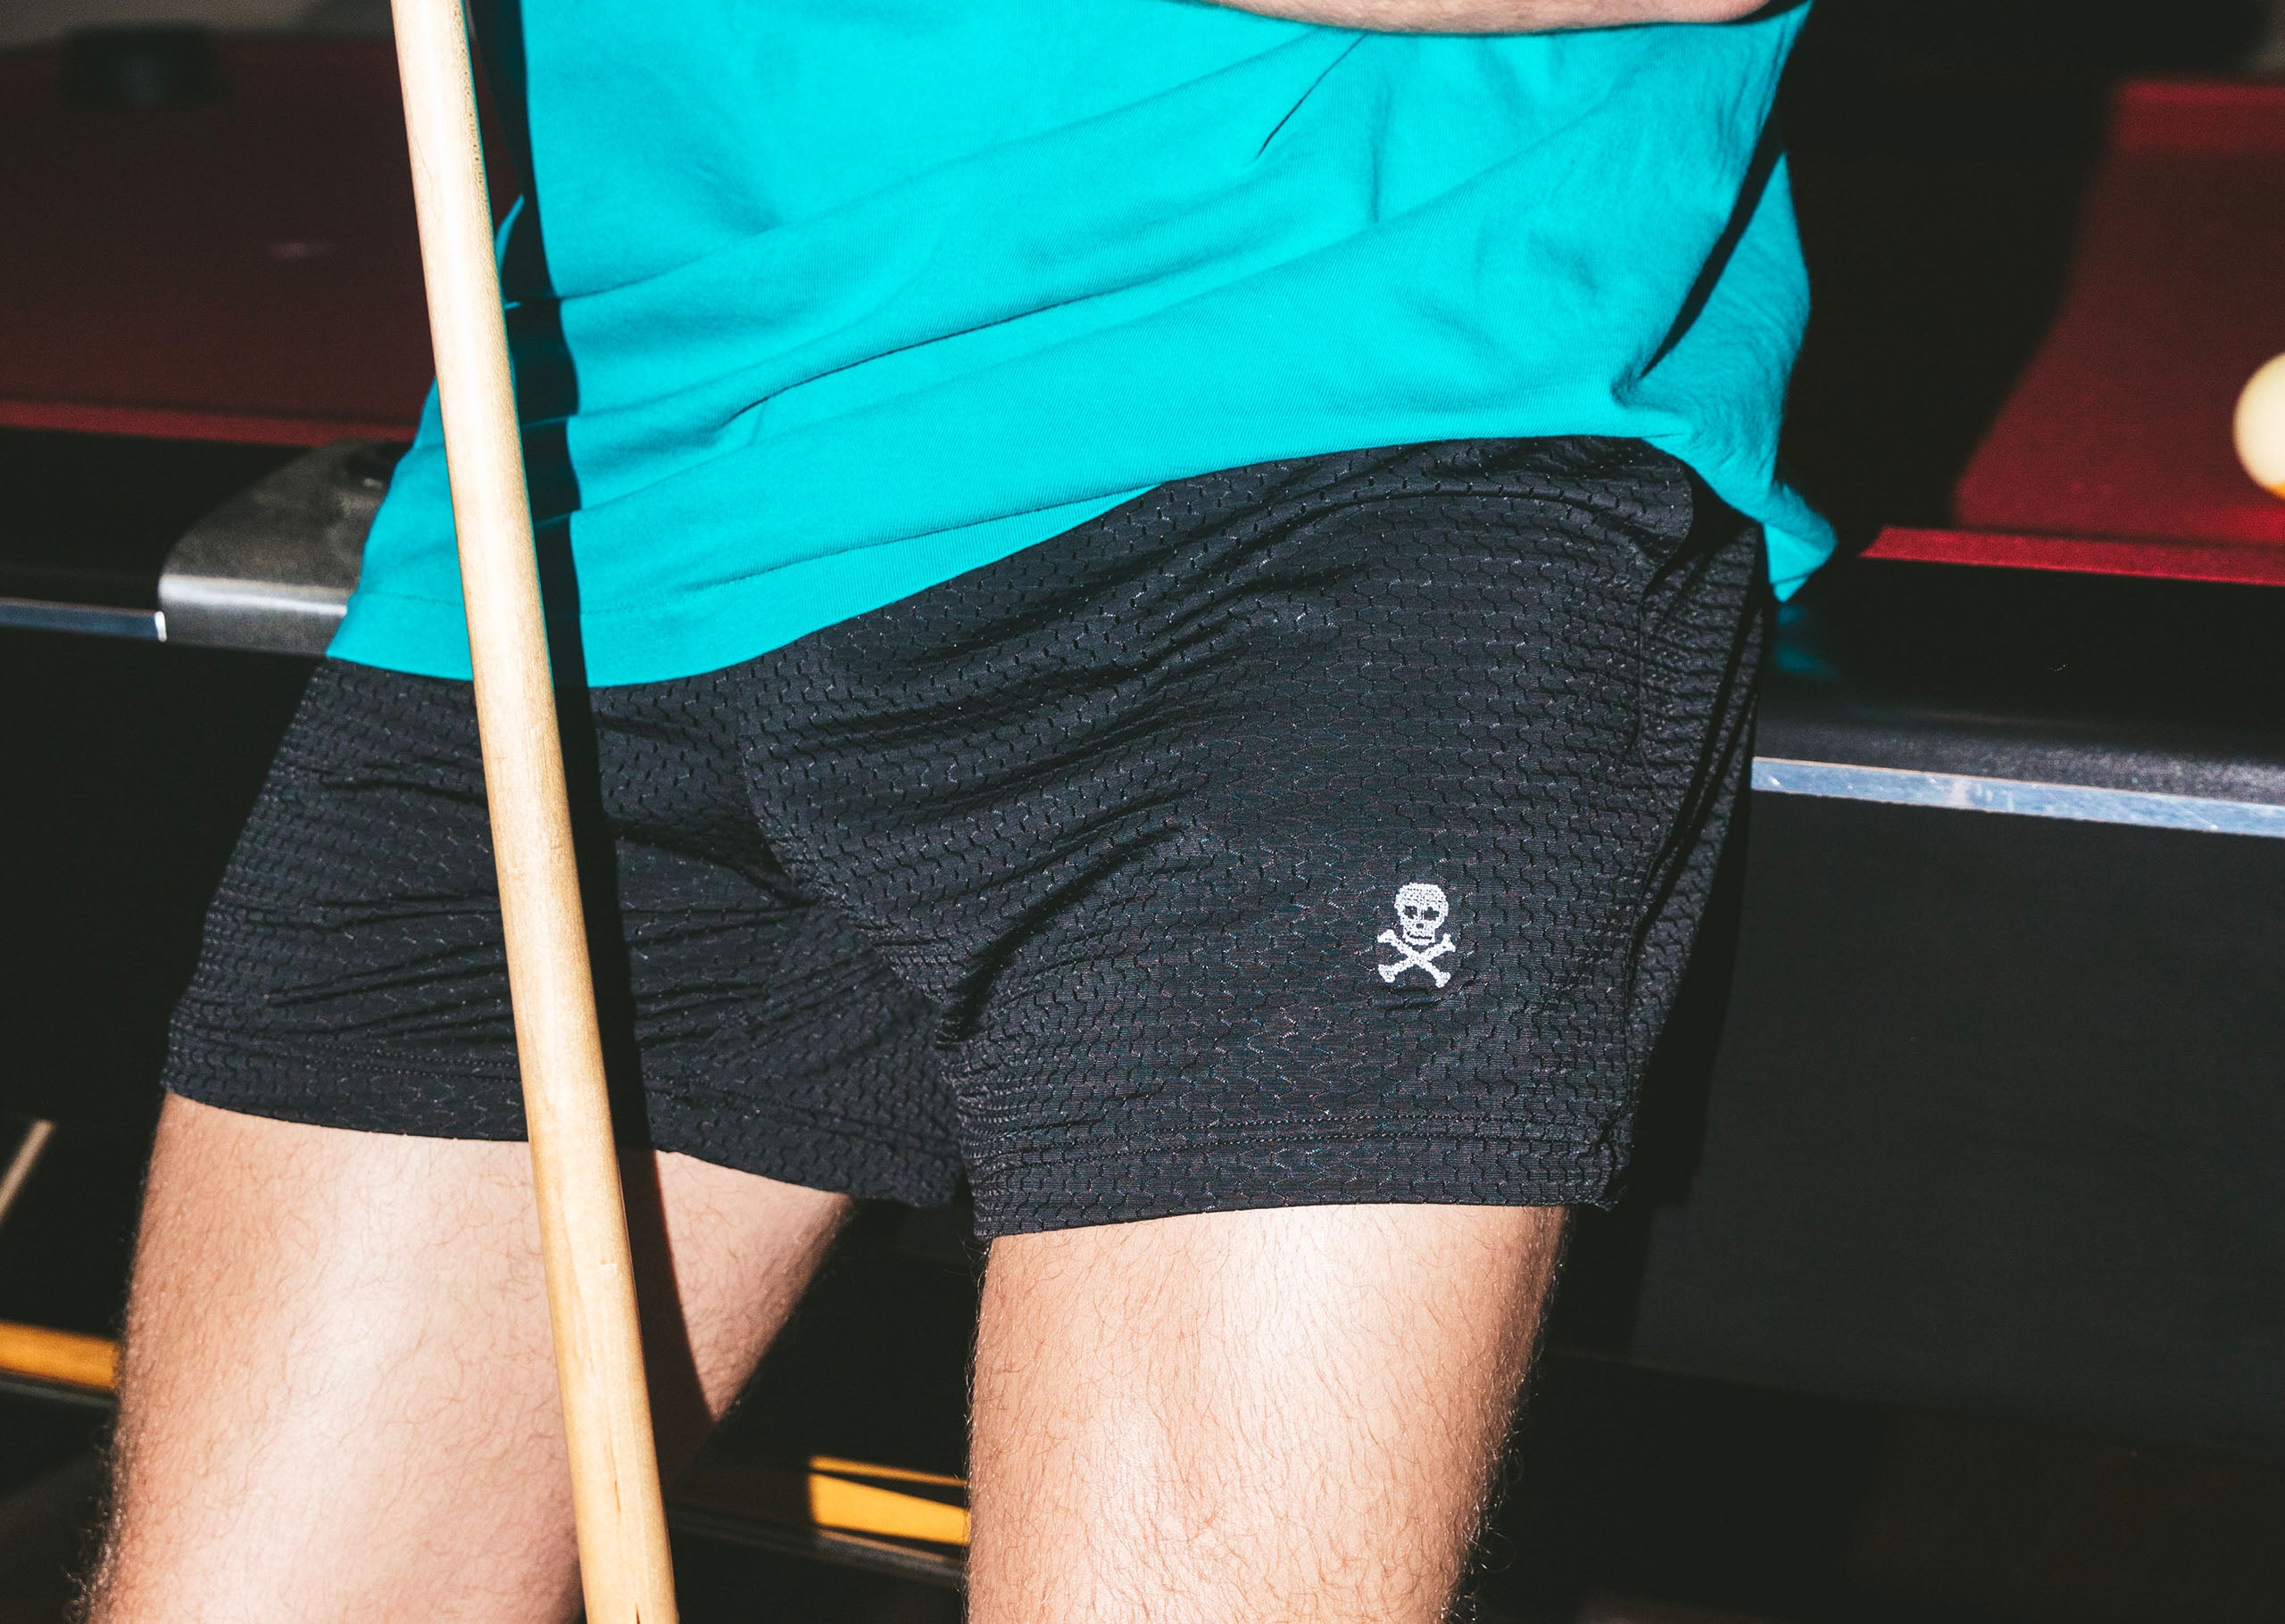 Man wearing black mesh shorts with white skull icon leaning against pool table.